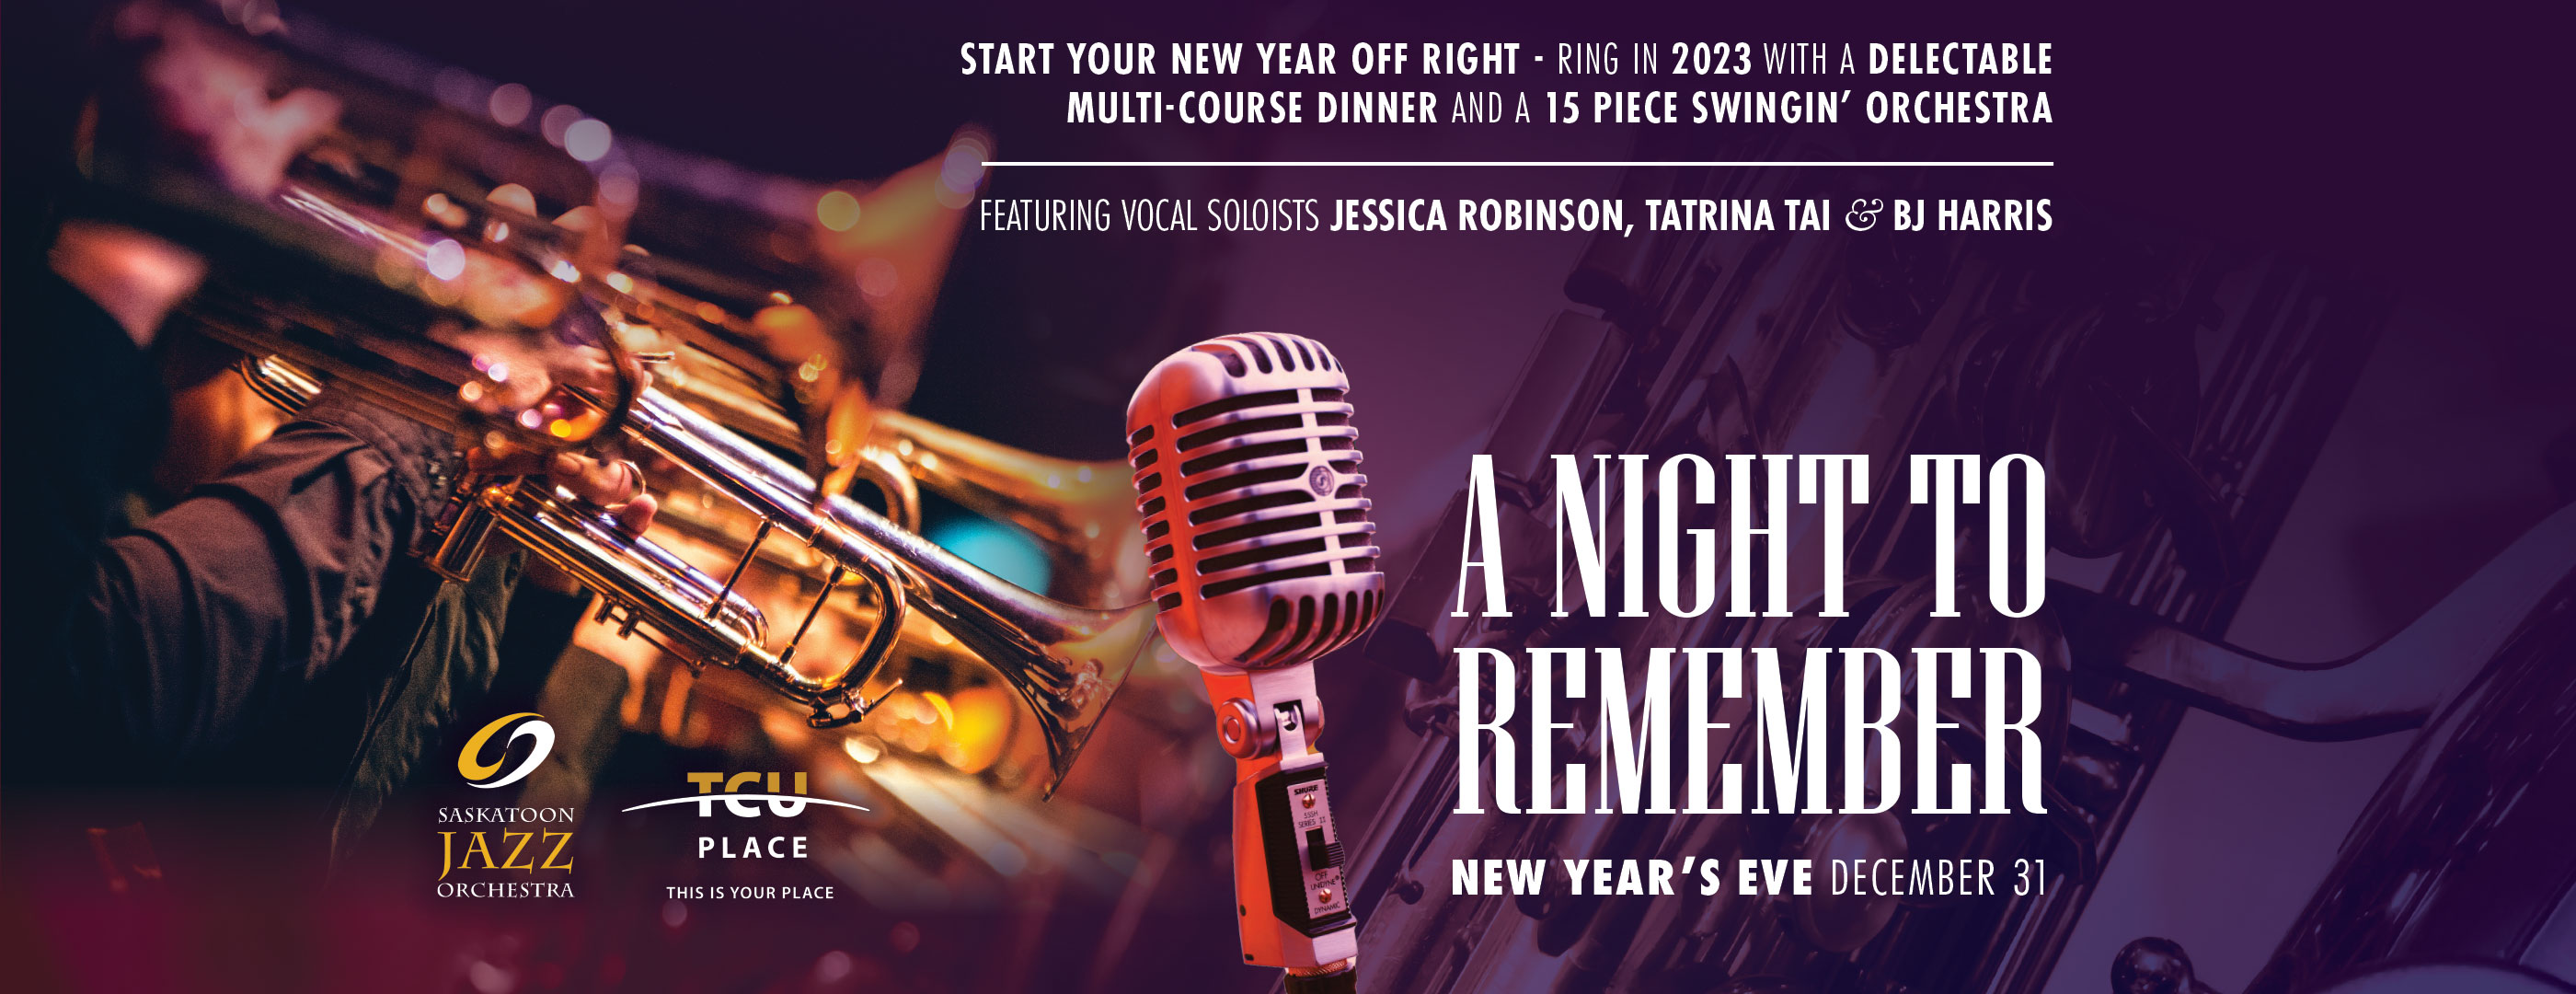 New Year's Eve - A Night To Remember